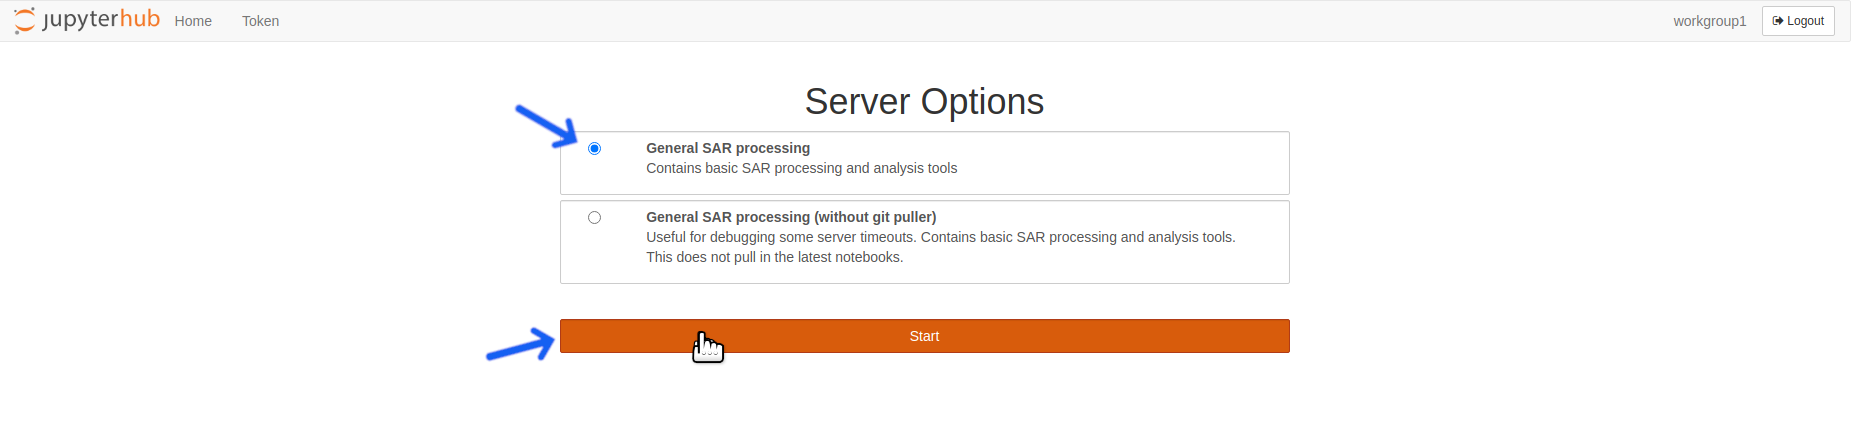 Select a server option and click the start button